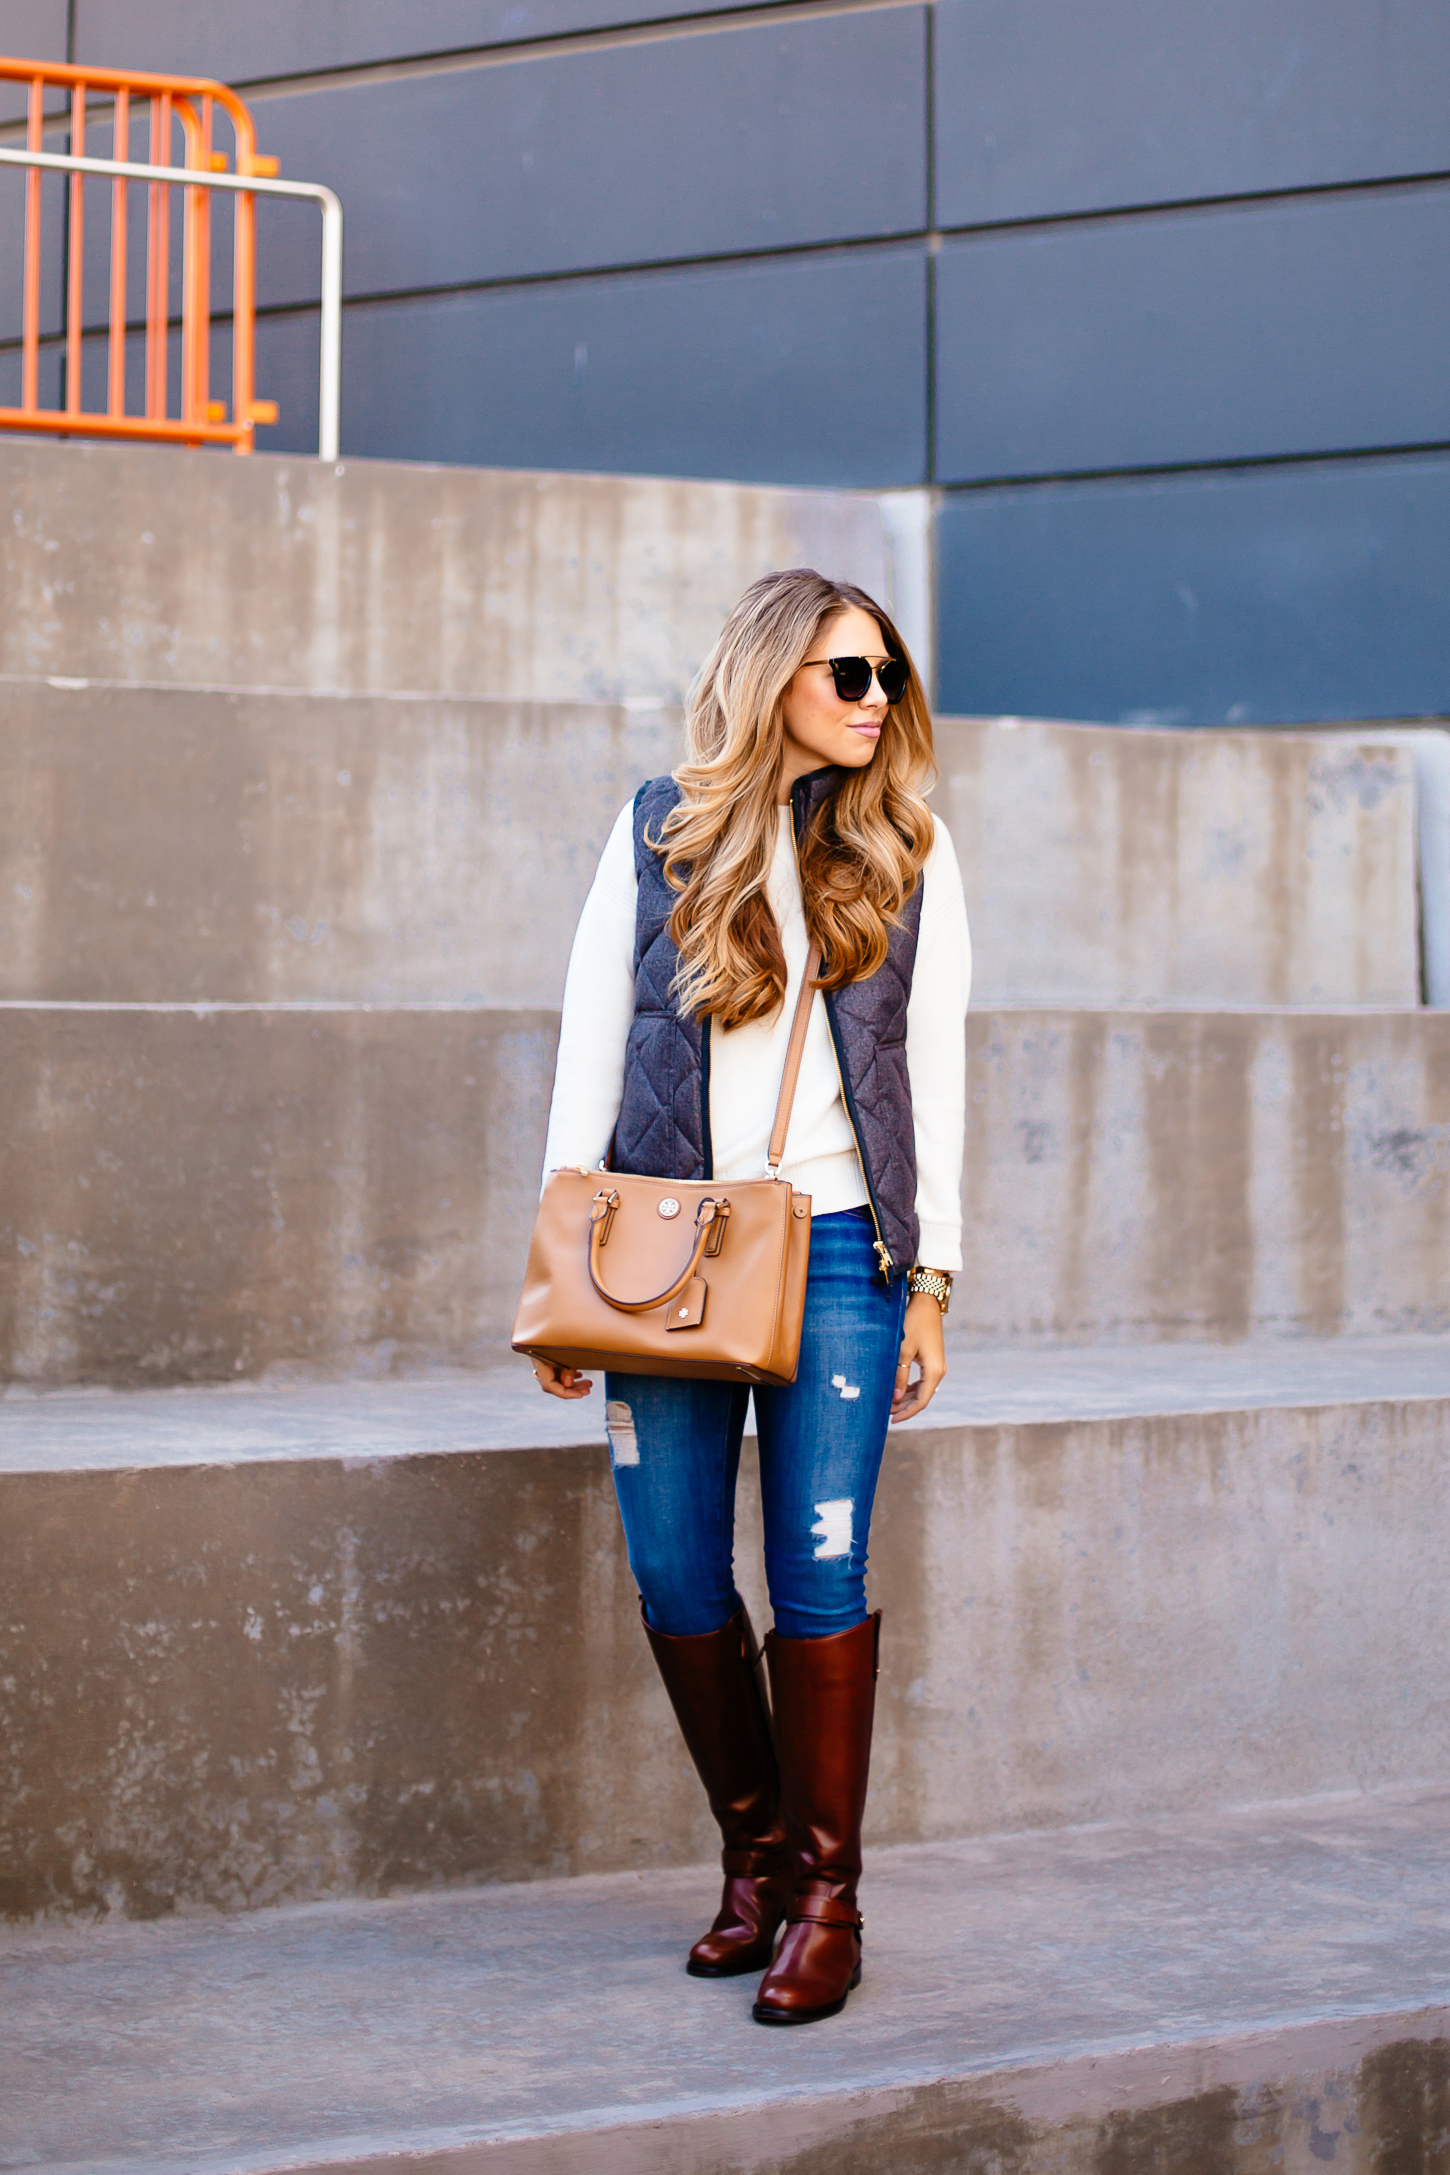 Petite Fashion and Style Blog, J.Crew Andover Peacoat, J.Crew Perfect  Shirt in Navy Plaid, Tory Burch Riding Boots